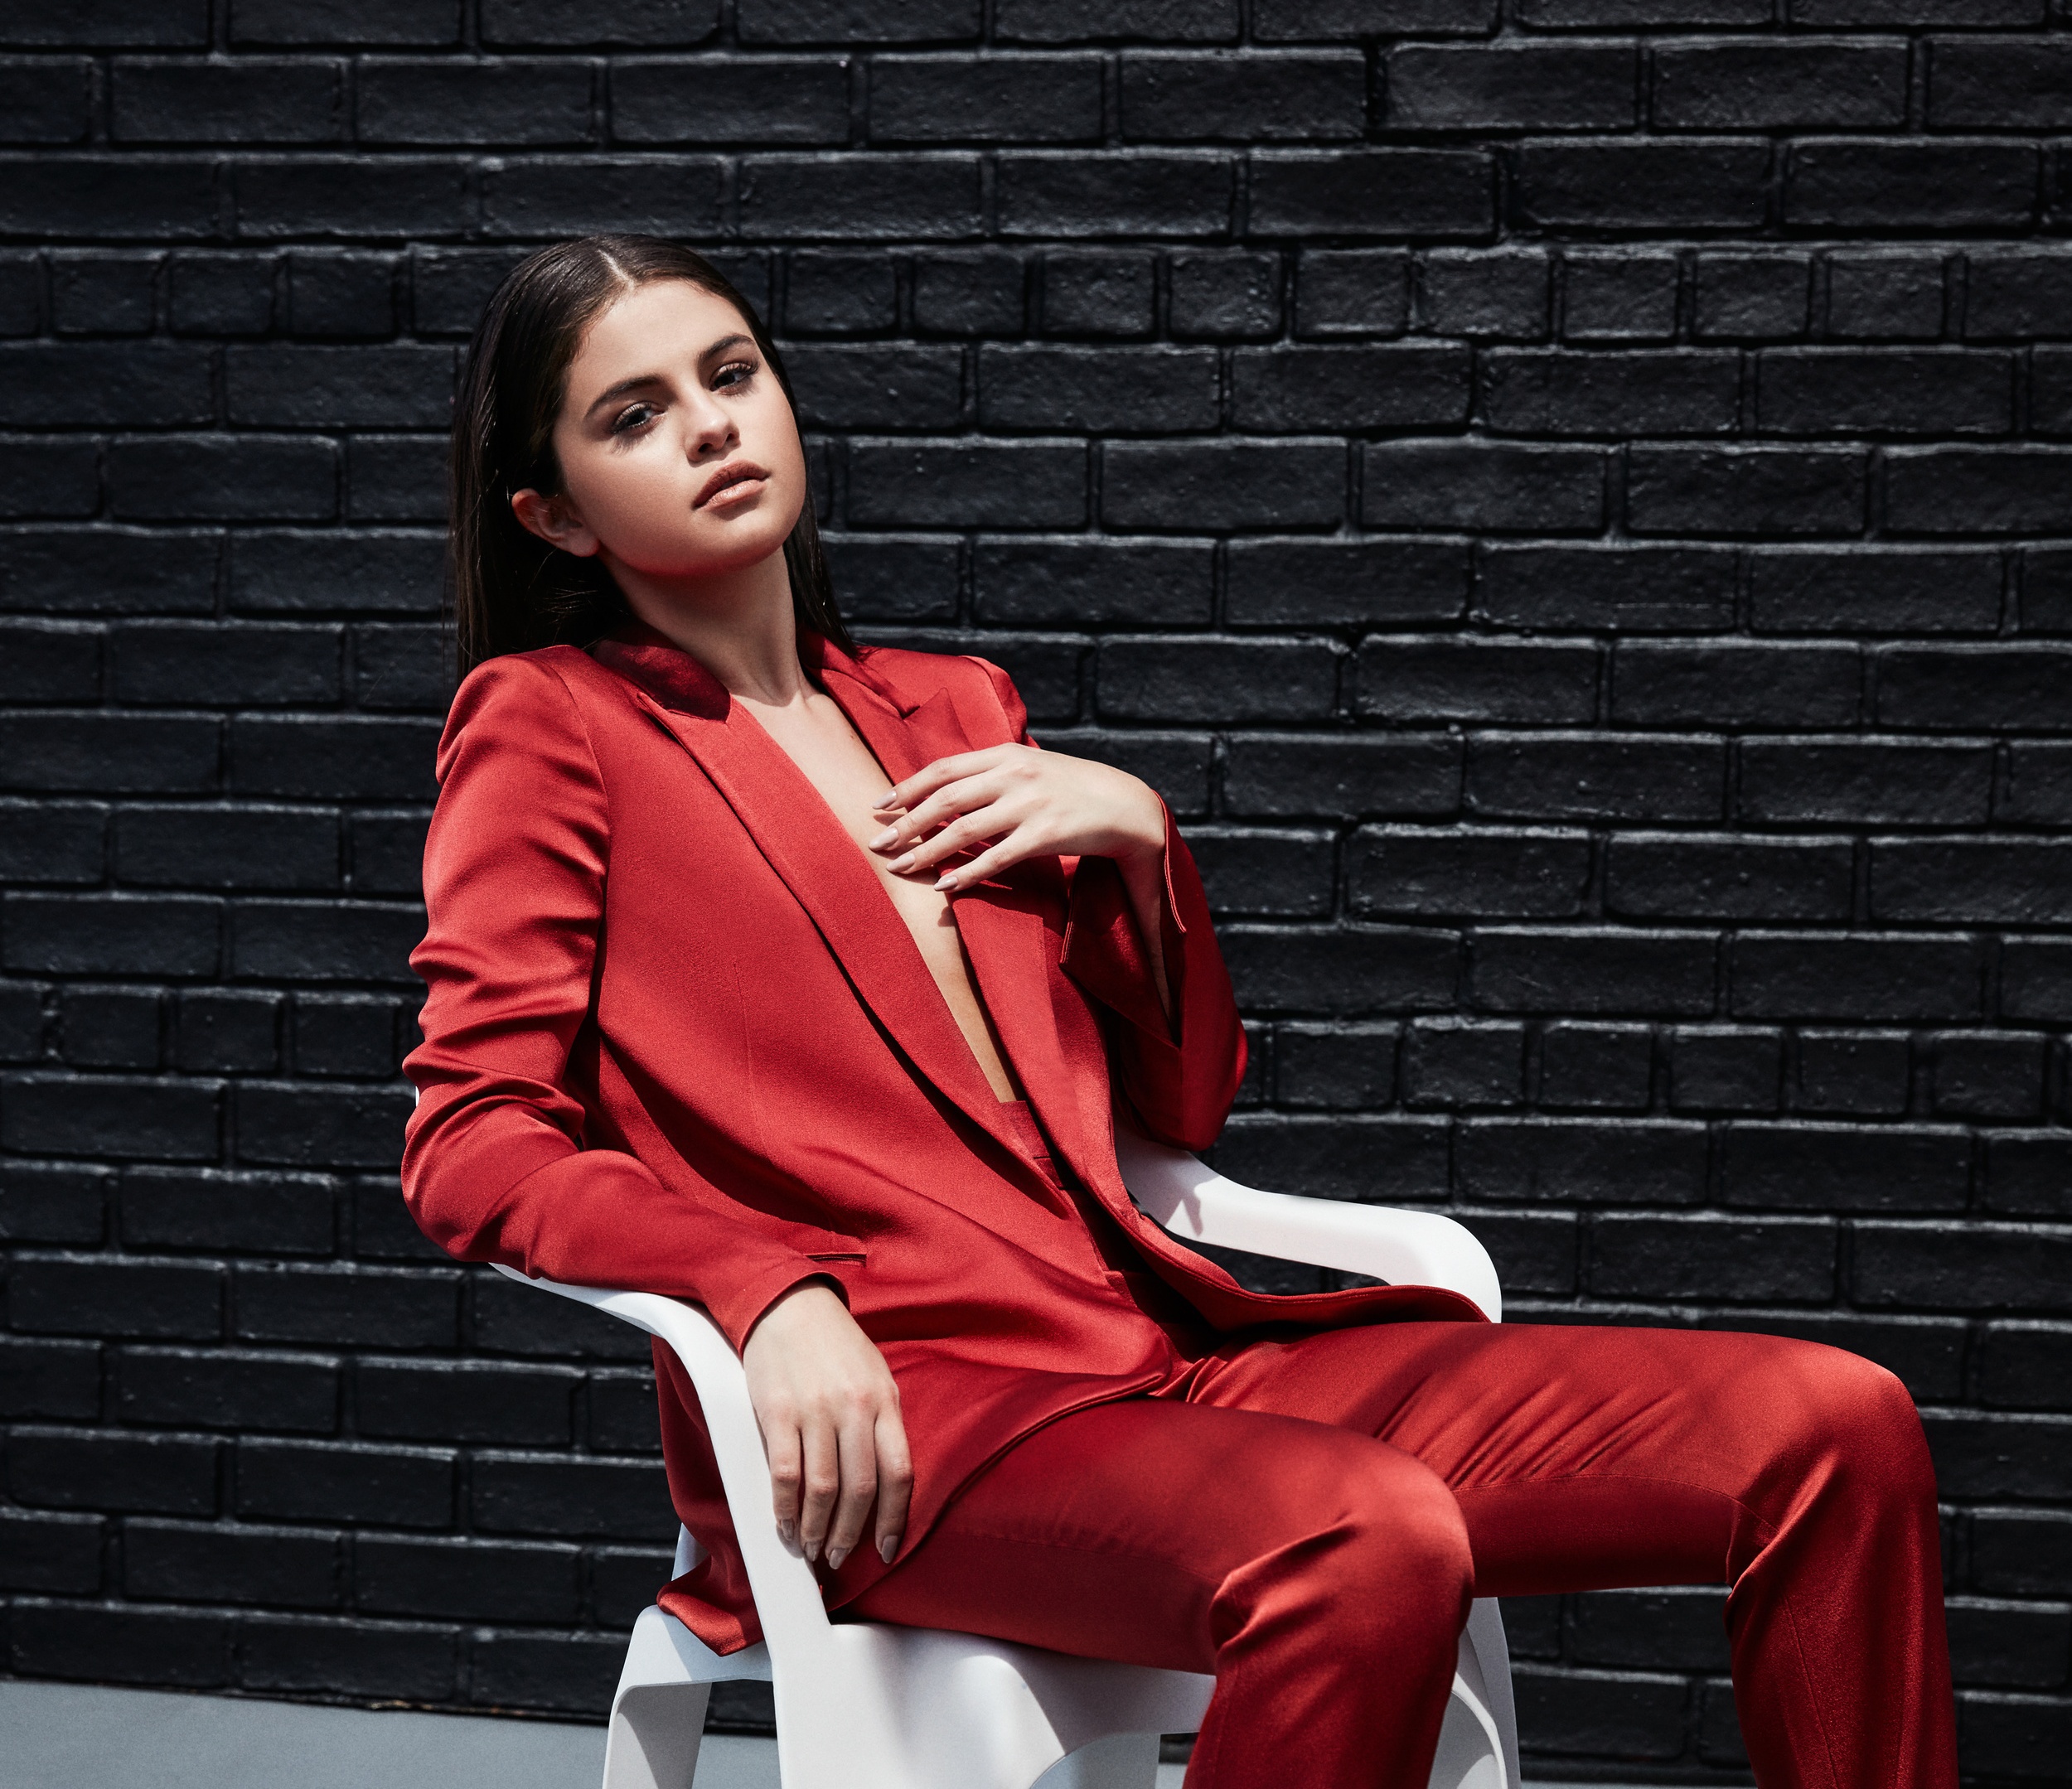 Wallpaper sitting, celebrity, Selena Gomez, red suit for mobile